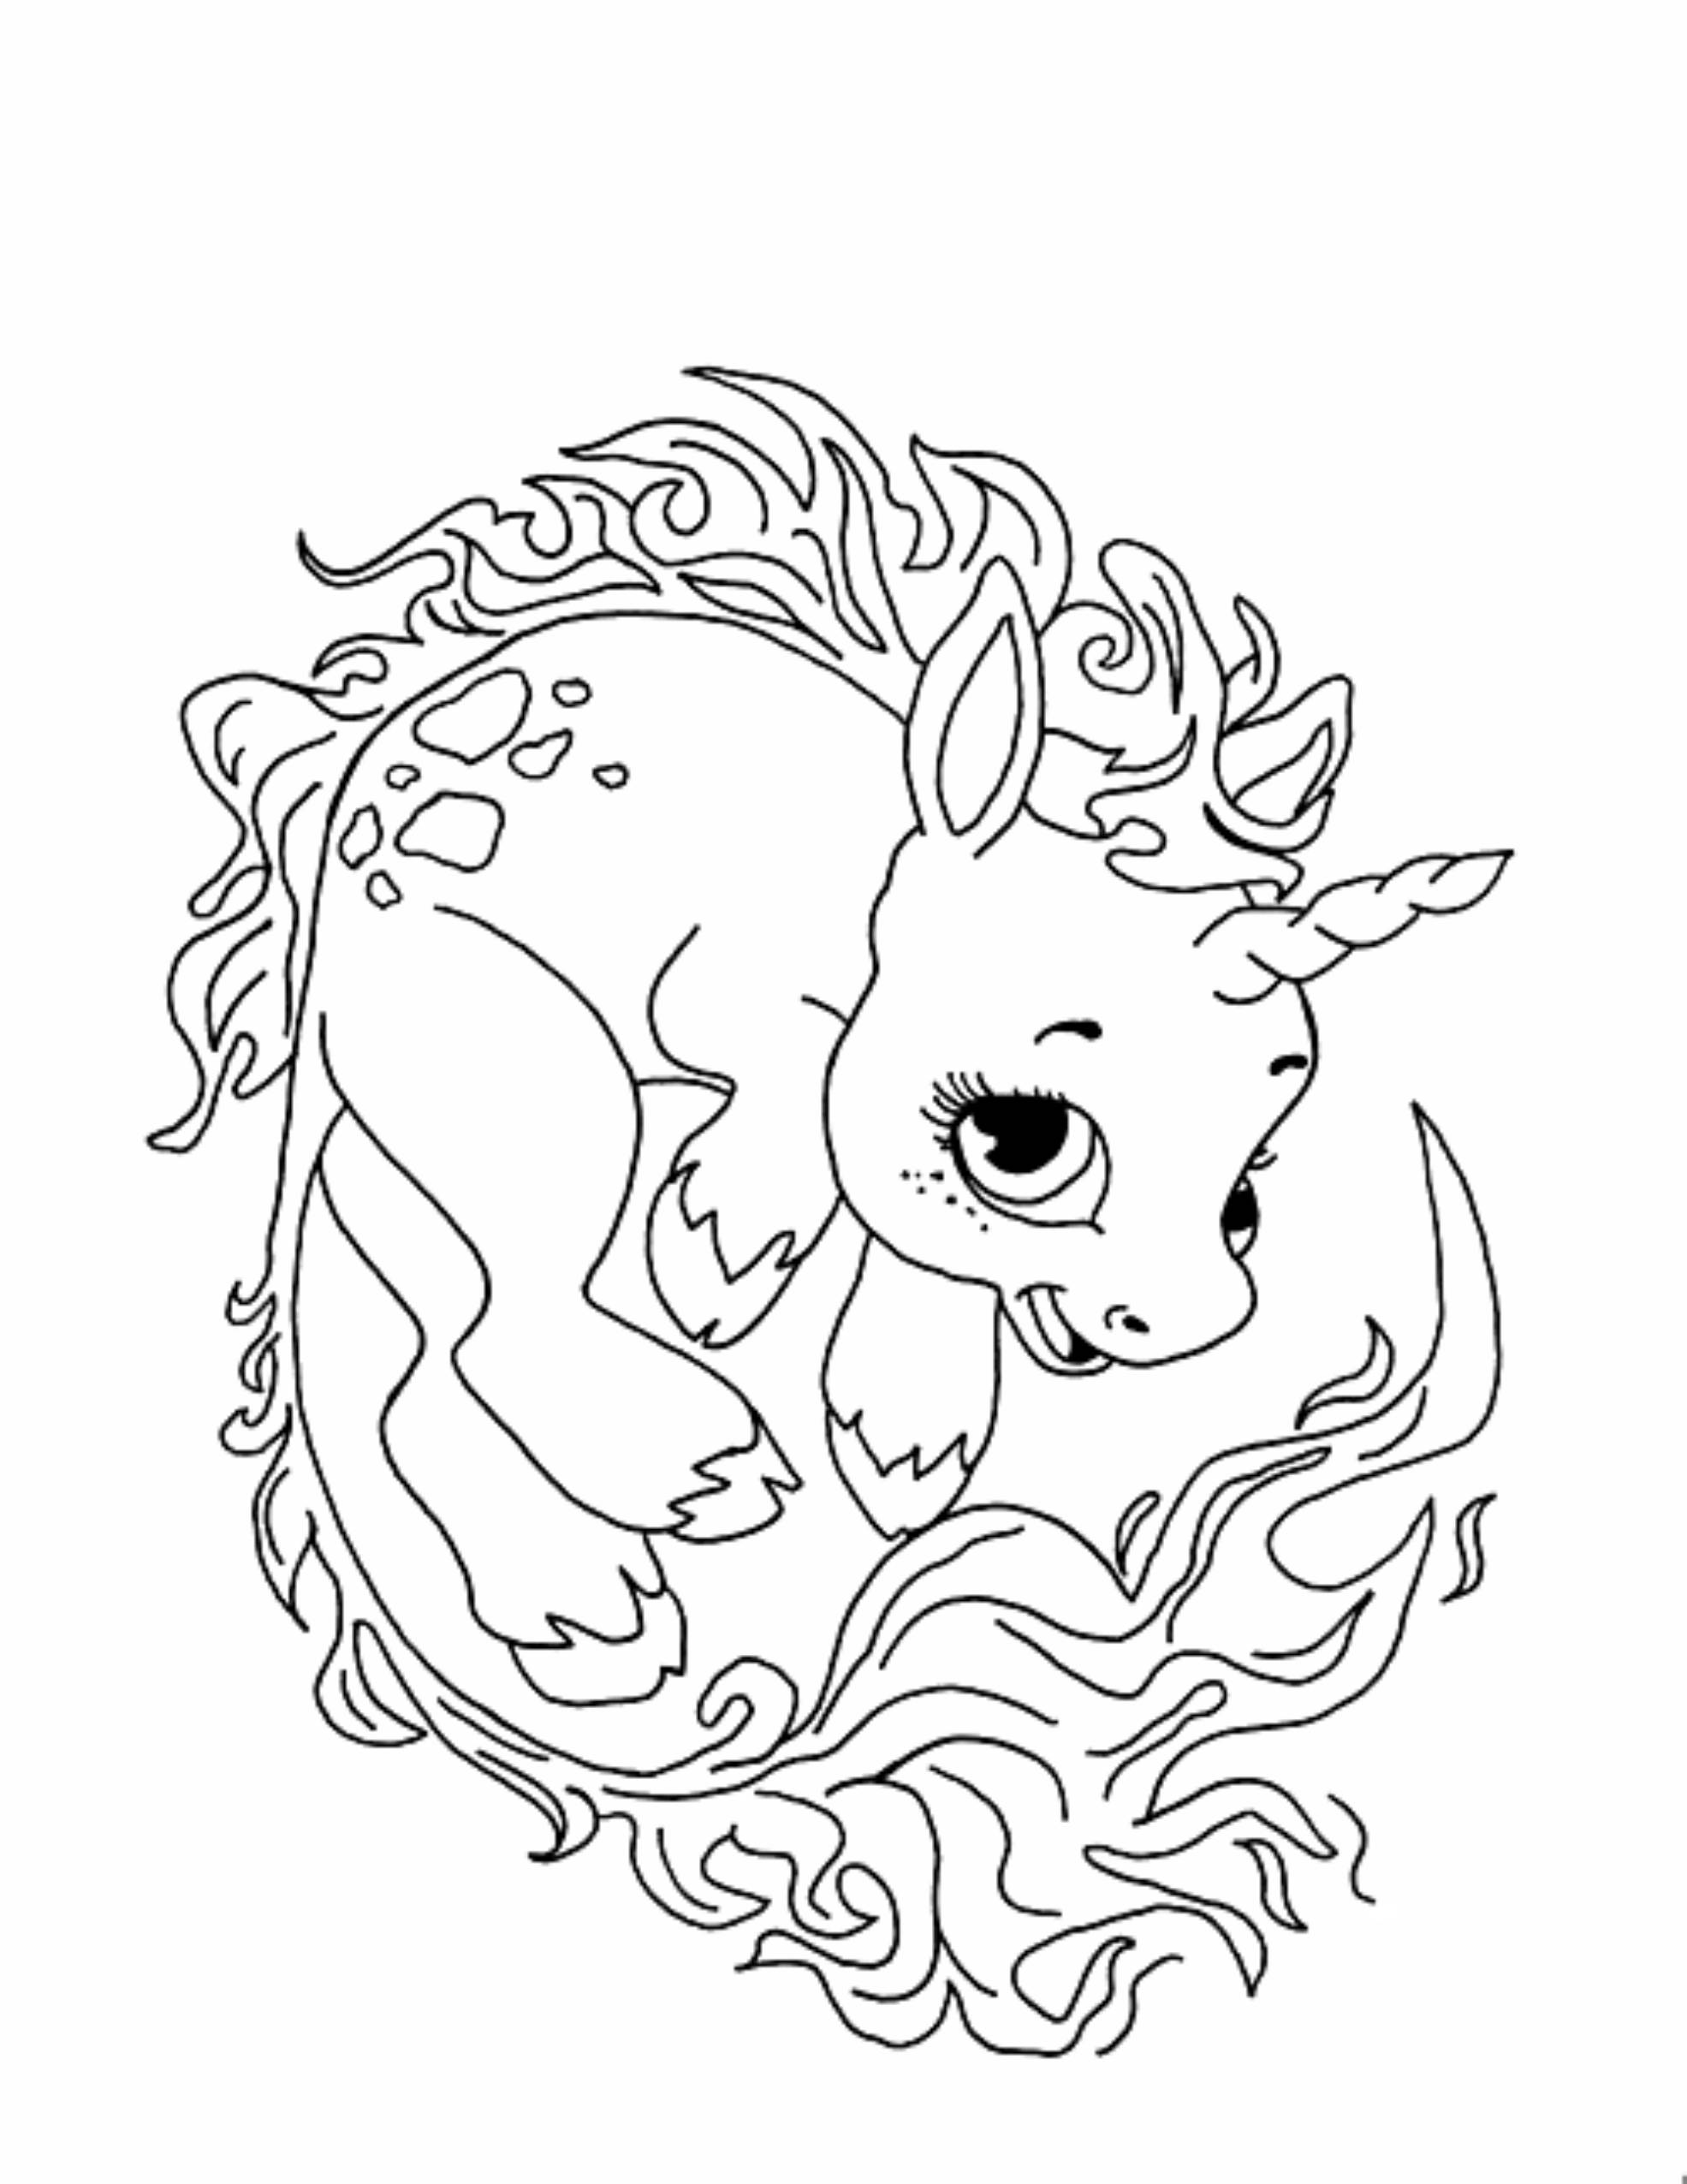 Free Printable Unicorn Coloring Page Download Free Clip Art Free